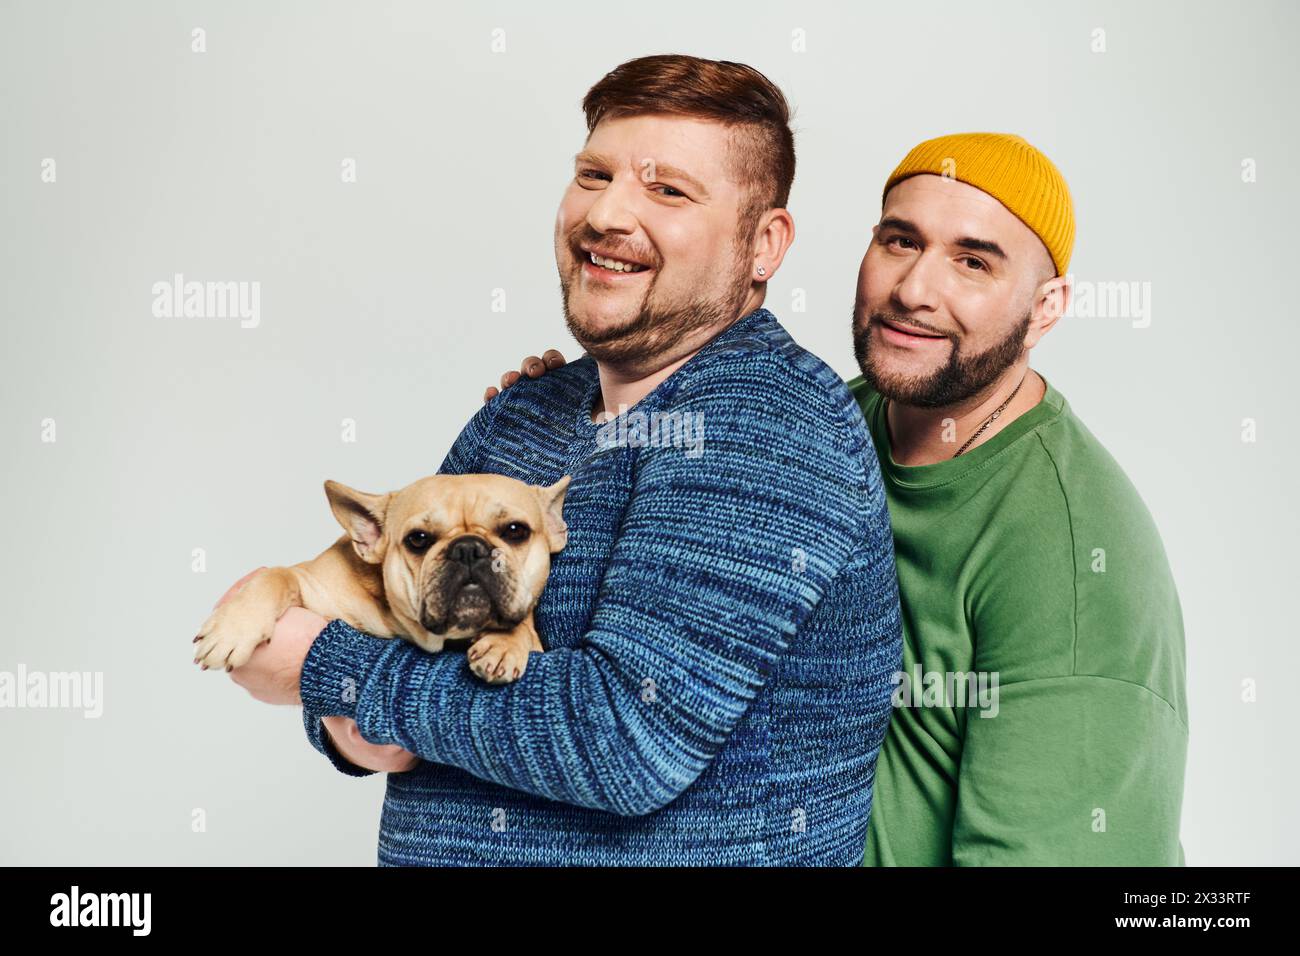 Two men lovingly hold a small dog in their arms, enjoying time together. Stock Photo